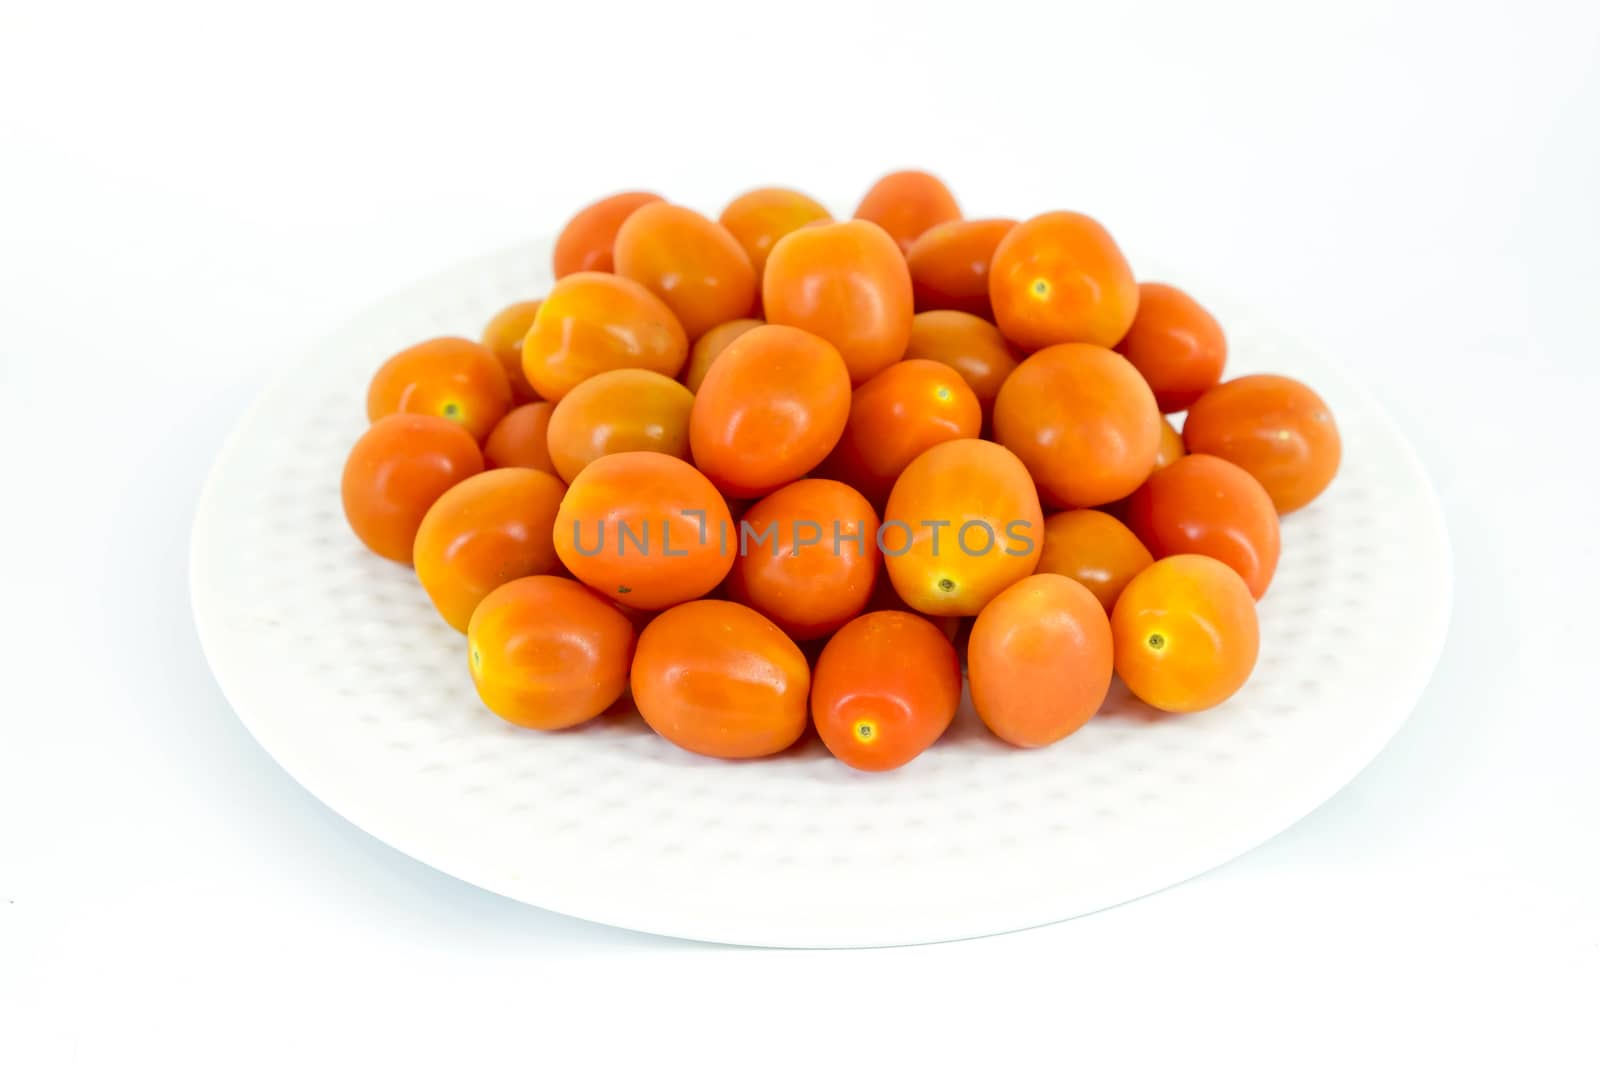 Cherry tomatoes in white plate by art9858